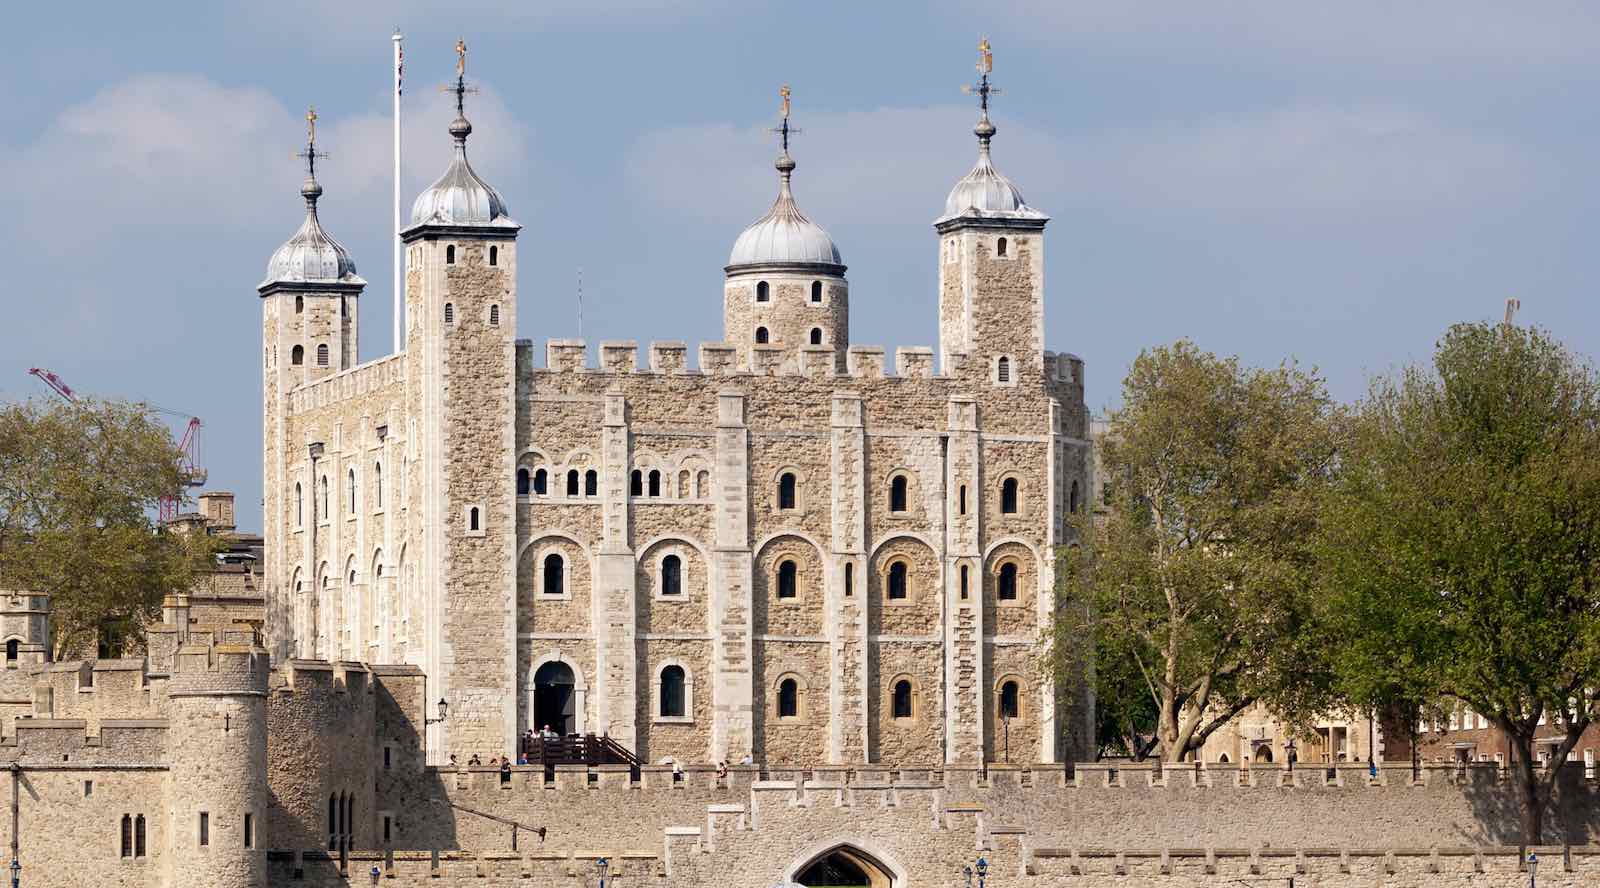 The Princes in the Tower is a longstanding mystery within British royalty. But will we ever find their true killers? It depends if the Queen lets them.